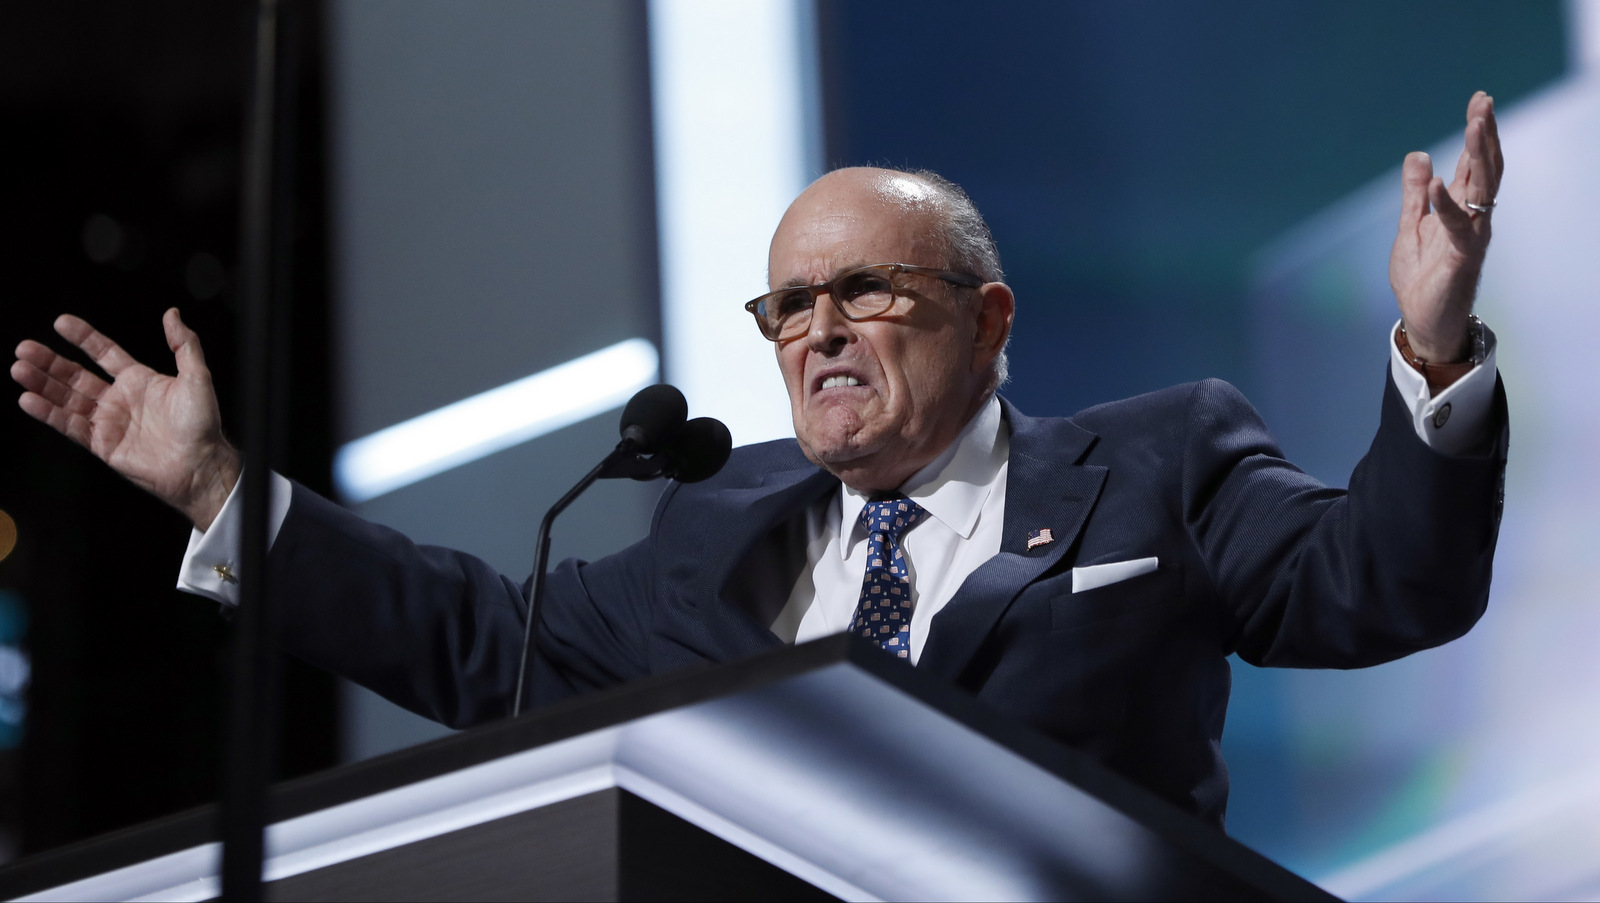 Former New York Mayor Rudy Giuliani speaks during first day of the Republican National Convention in Cleveland, Monday, July 18, 2016. (AP Photo/Carolyn Kaster)